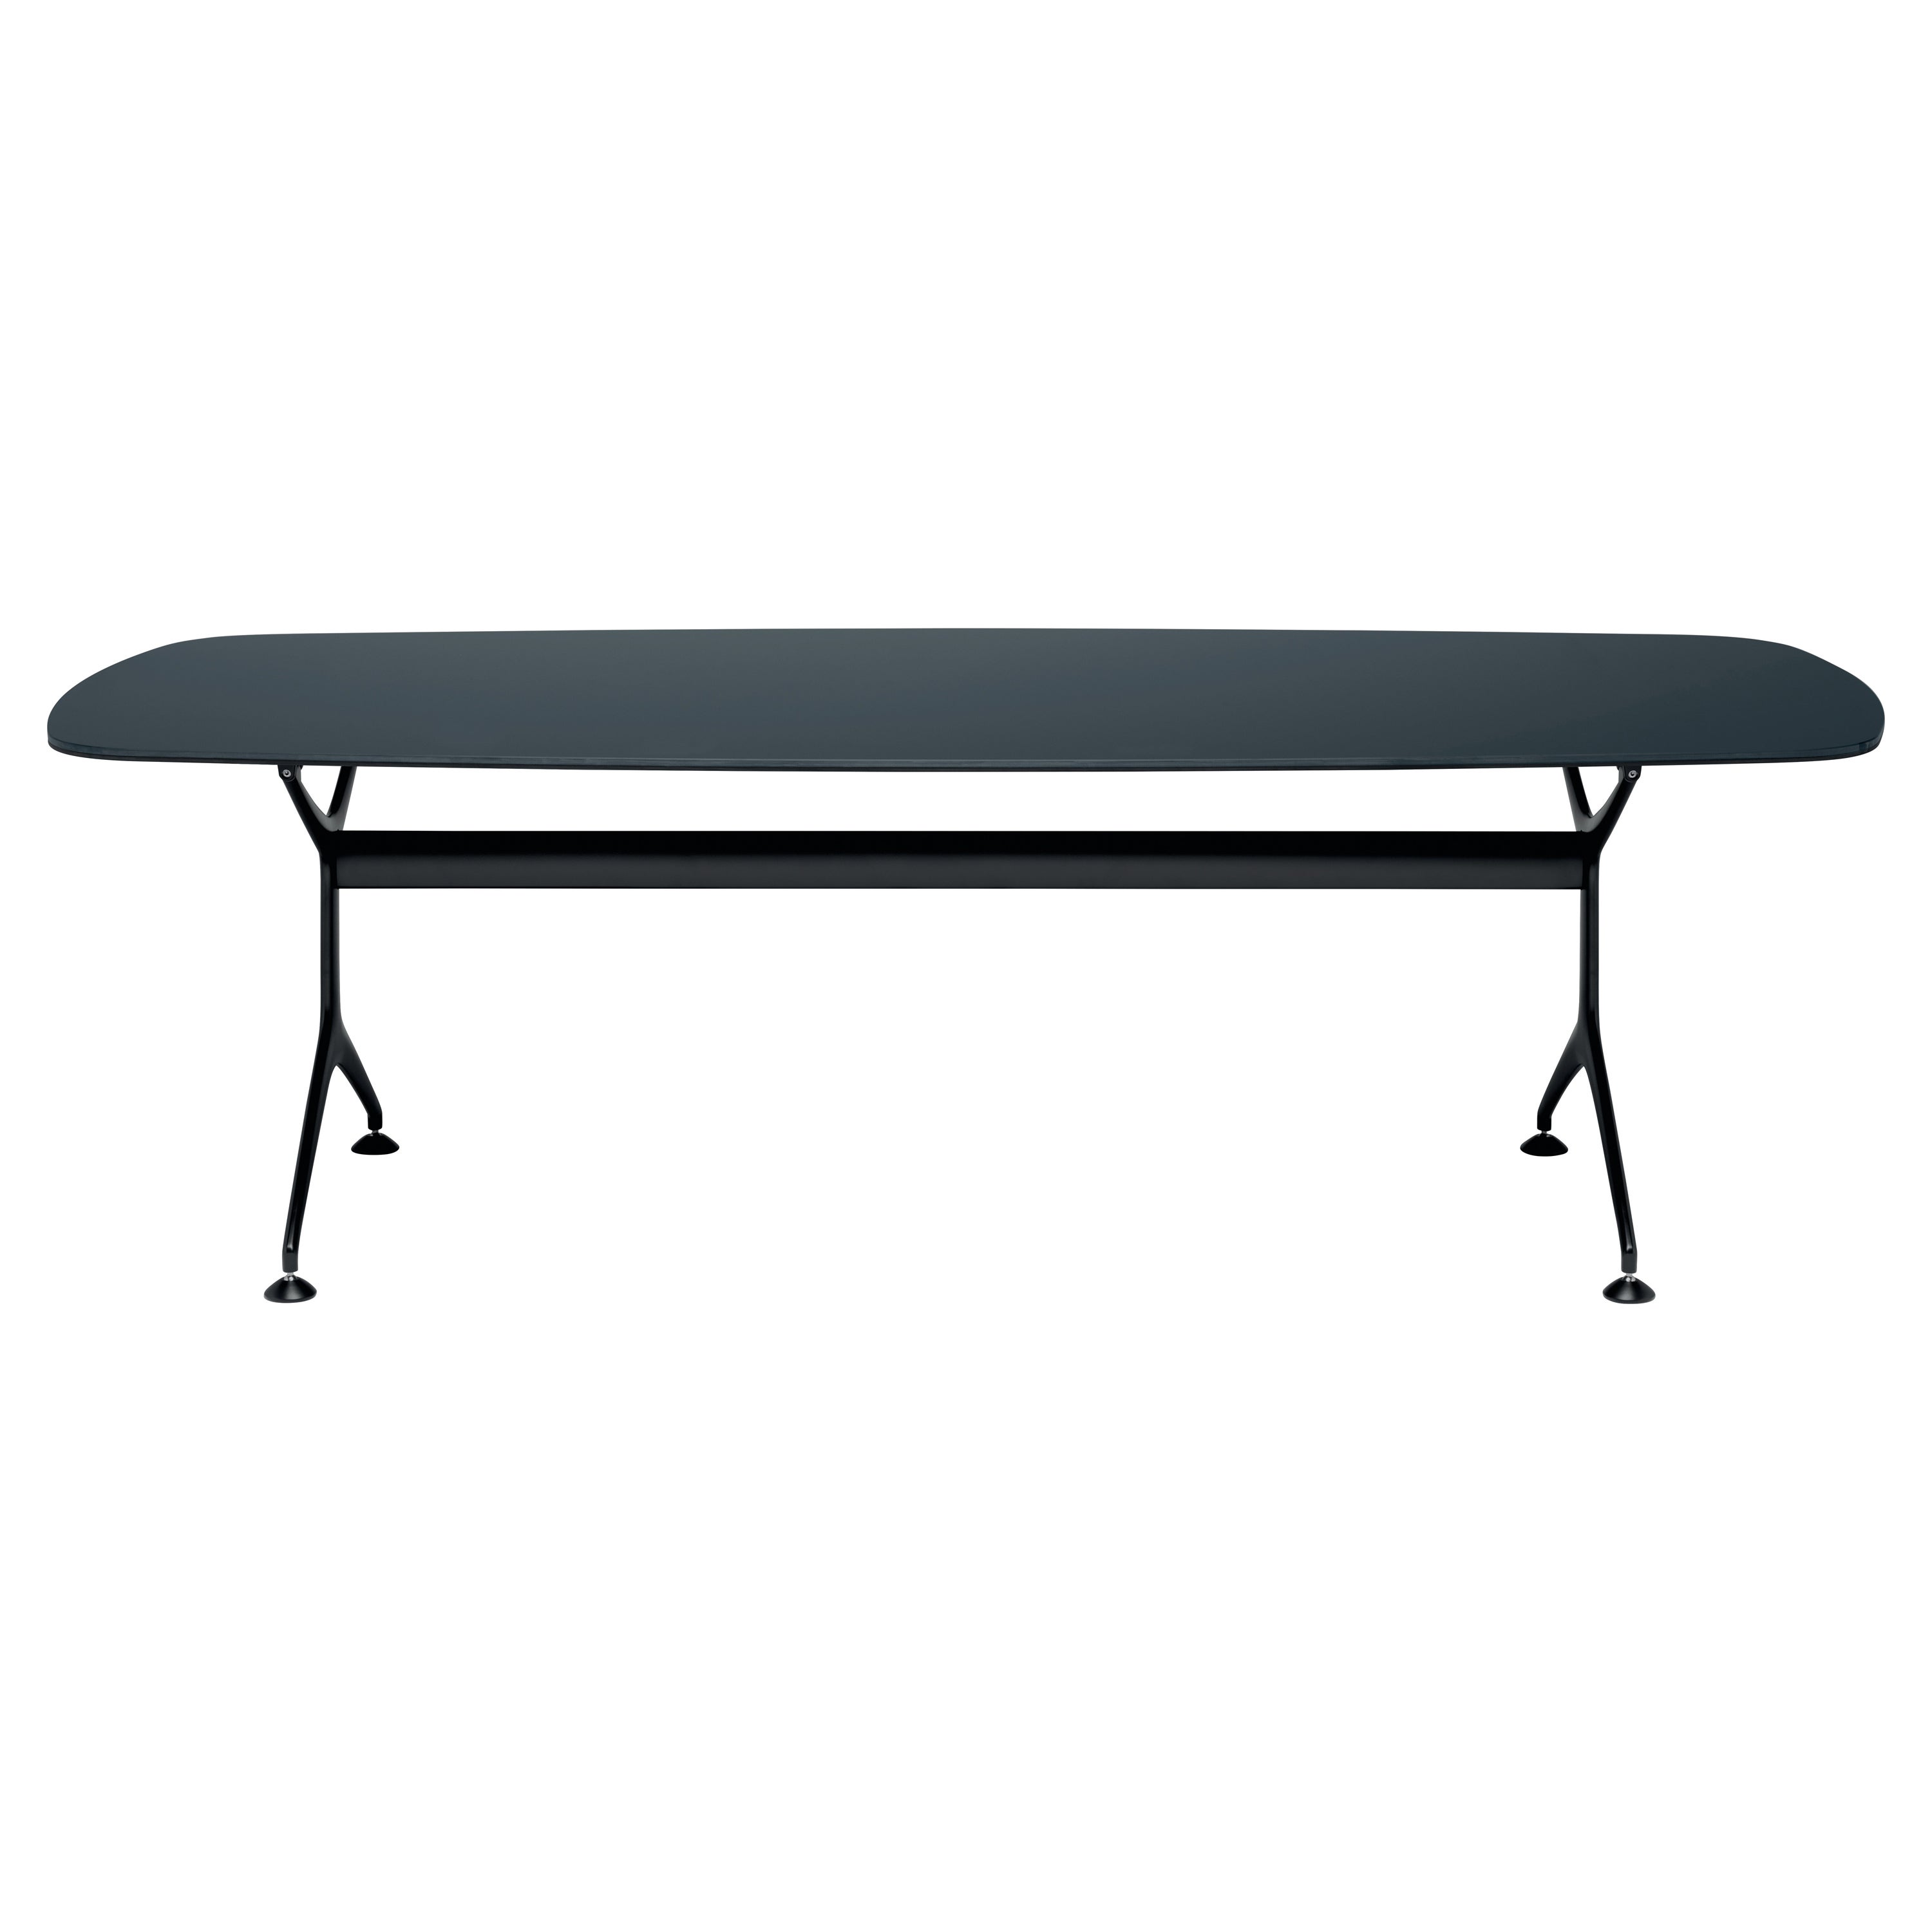 Alias Frametable 240 in Black Glass Top with Smooth Lacquered Aluminium Frame For Sale